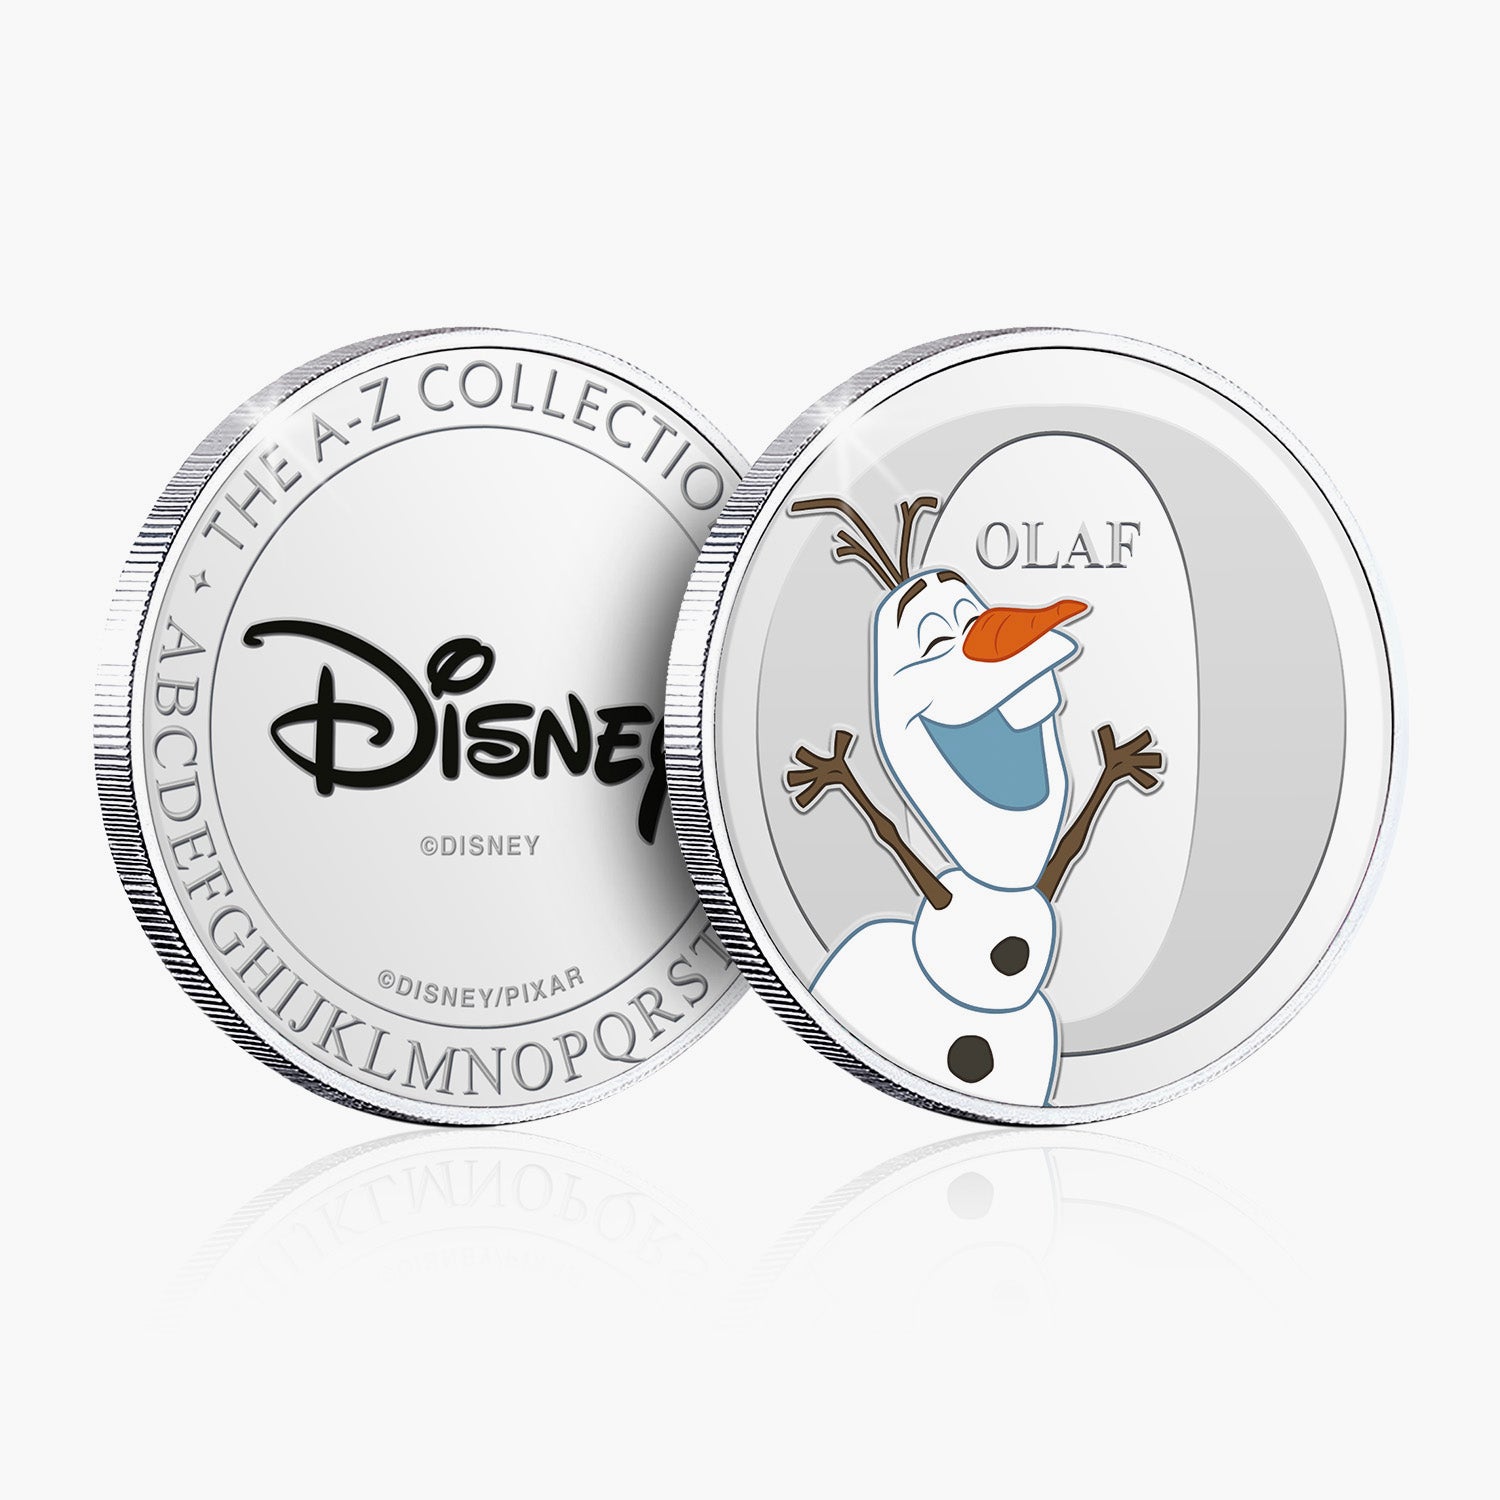 O is for Olaf Silver-Plated Full Colour Commemorative